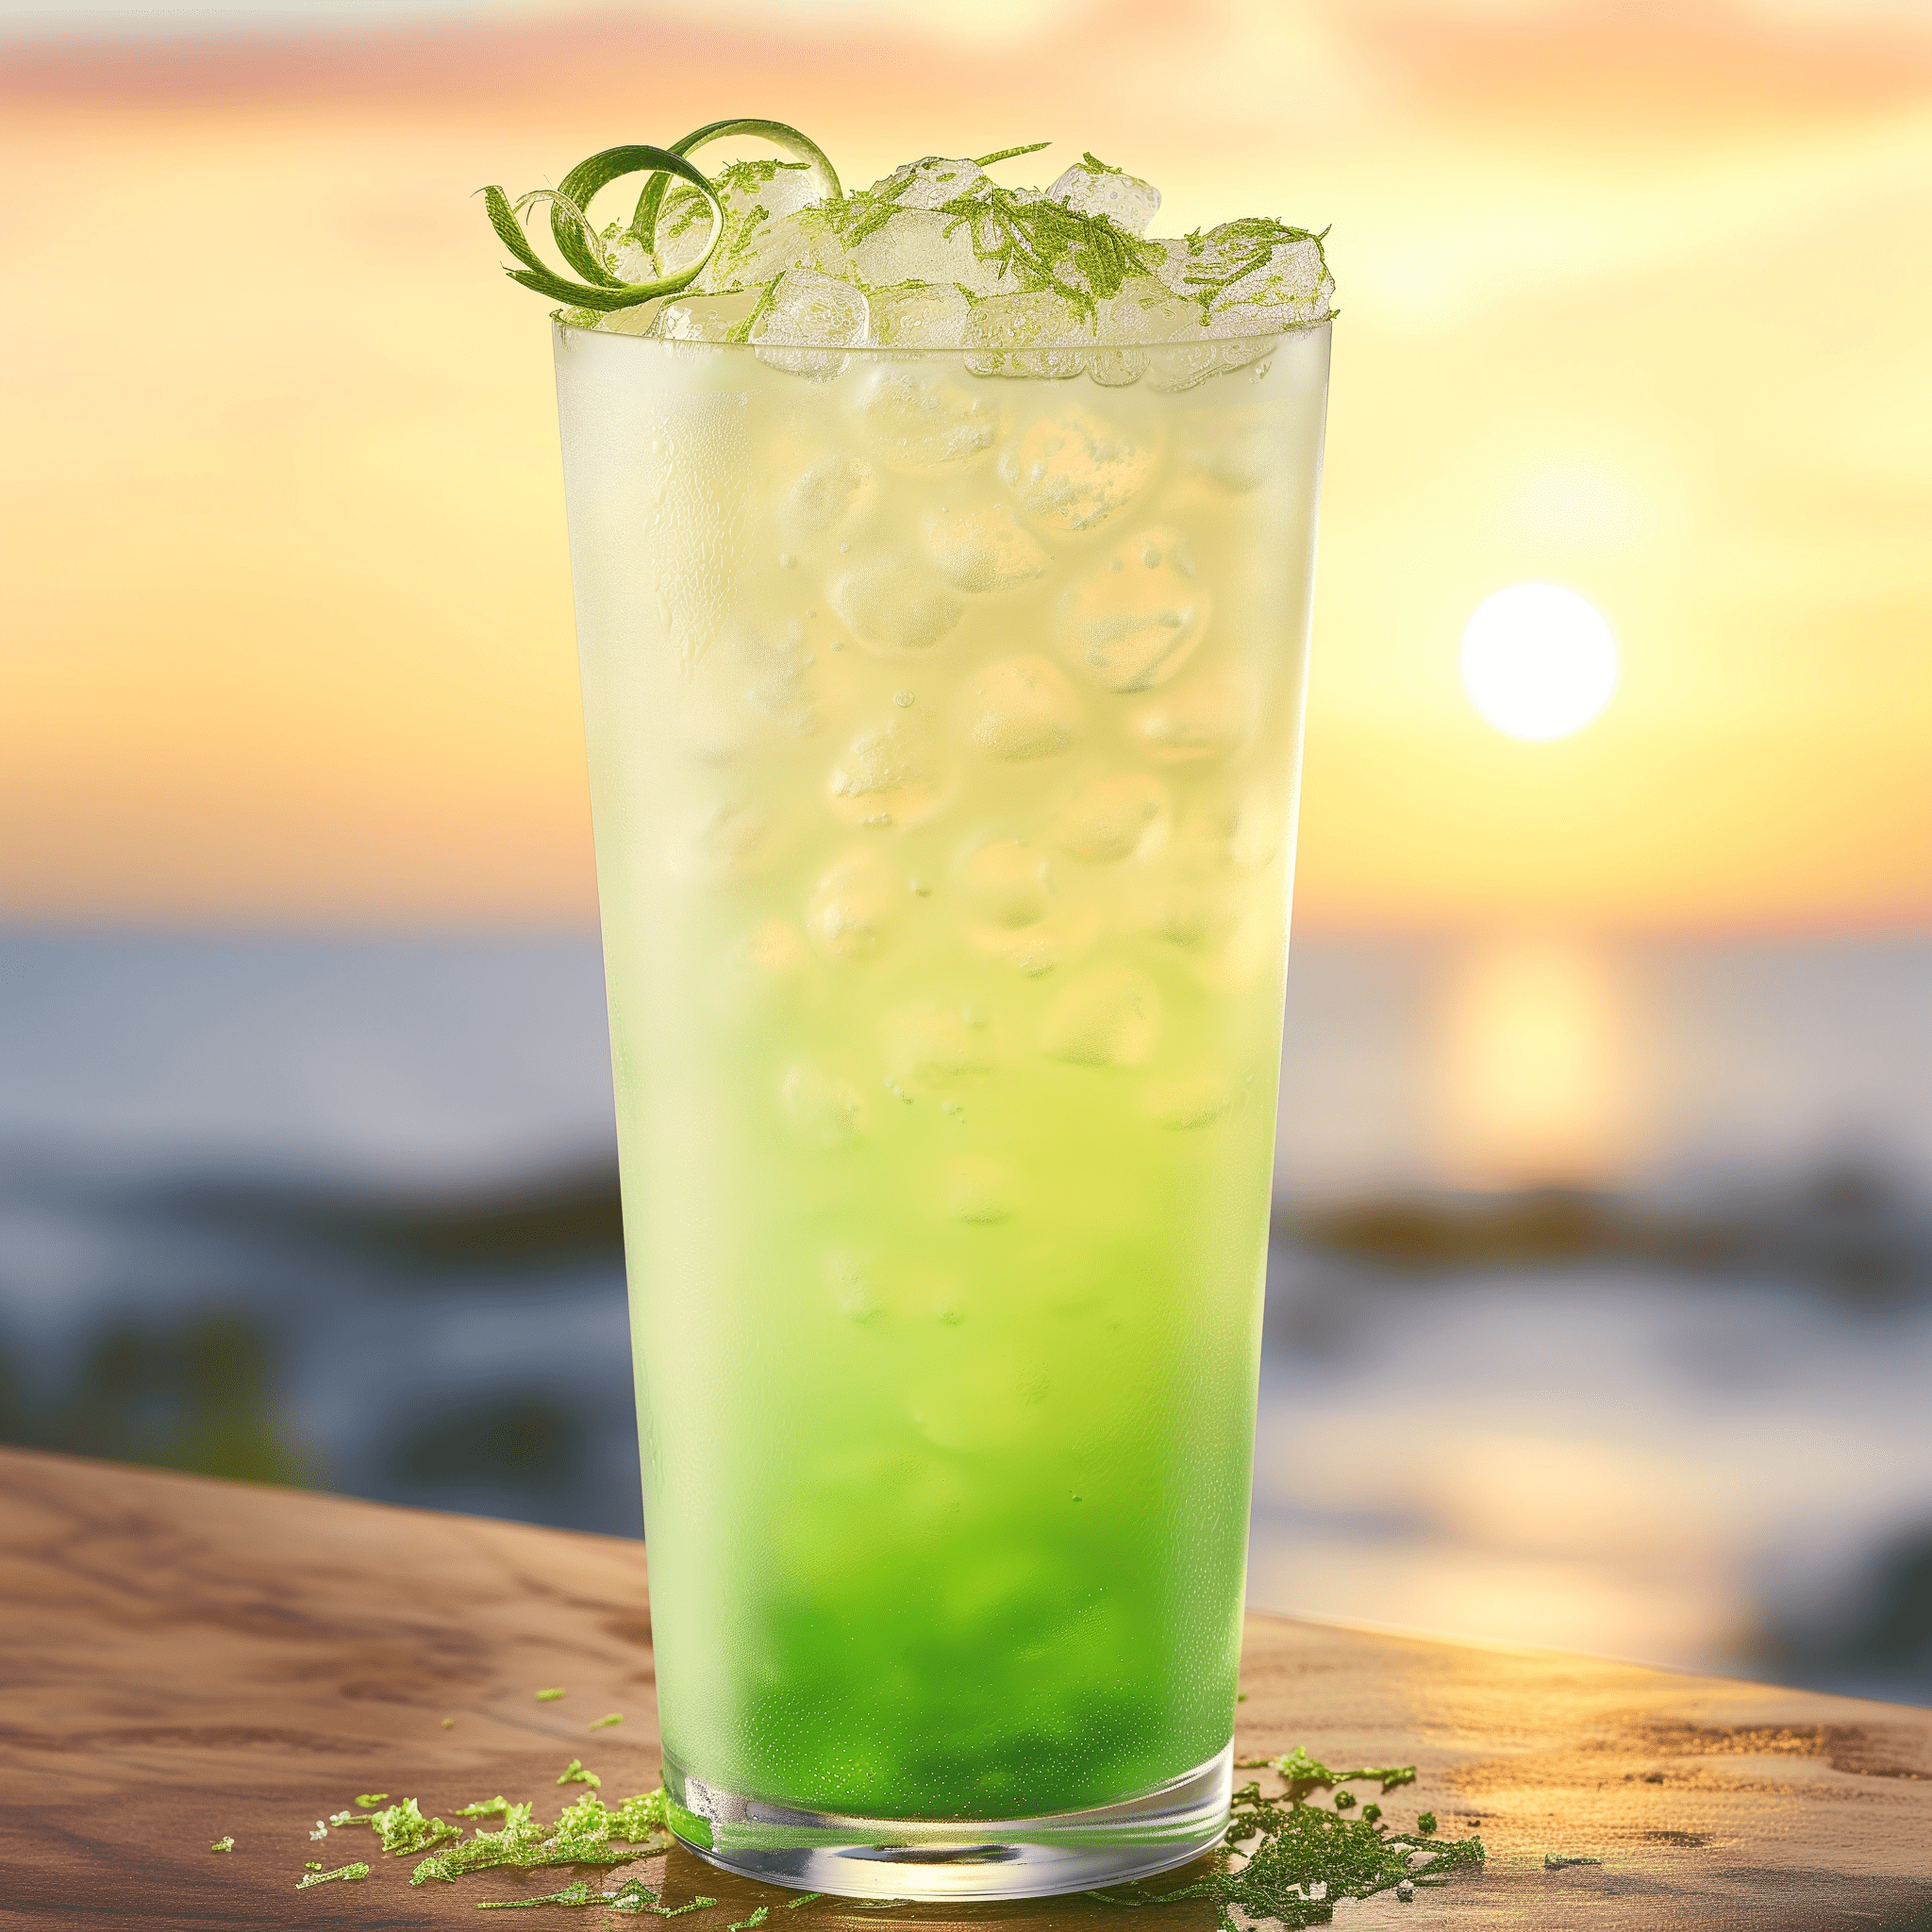 Lime Crush Cocktail Recipe - The Lime Crush is a delightful mix of tart and sweet, with the zesty lime providing a refreshing sour kick that is perfectly balanced by the subtle sweetness of the sugar and the effervescence of the lemonade. The vodka adds a clean, crisp spirituous note without overpowering the drink, making it an invigorating and easy-to-drink cocktail.